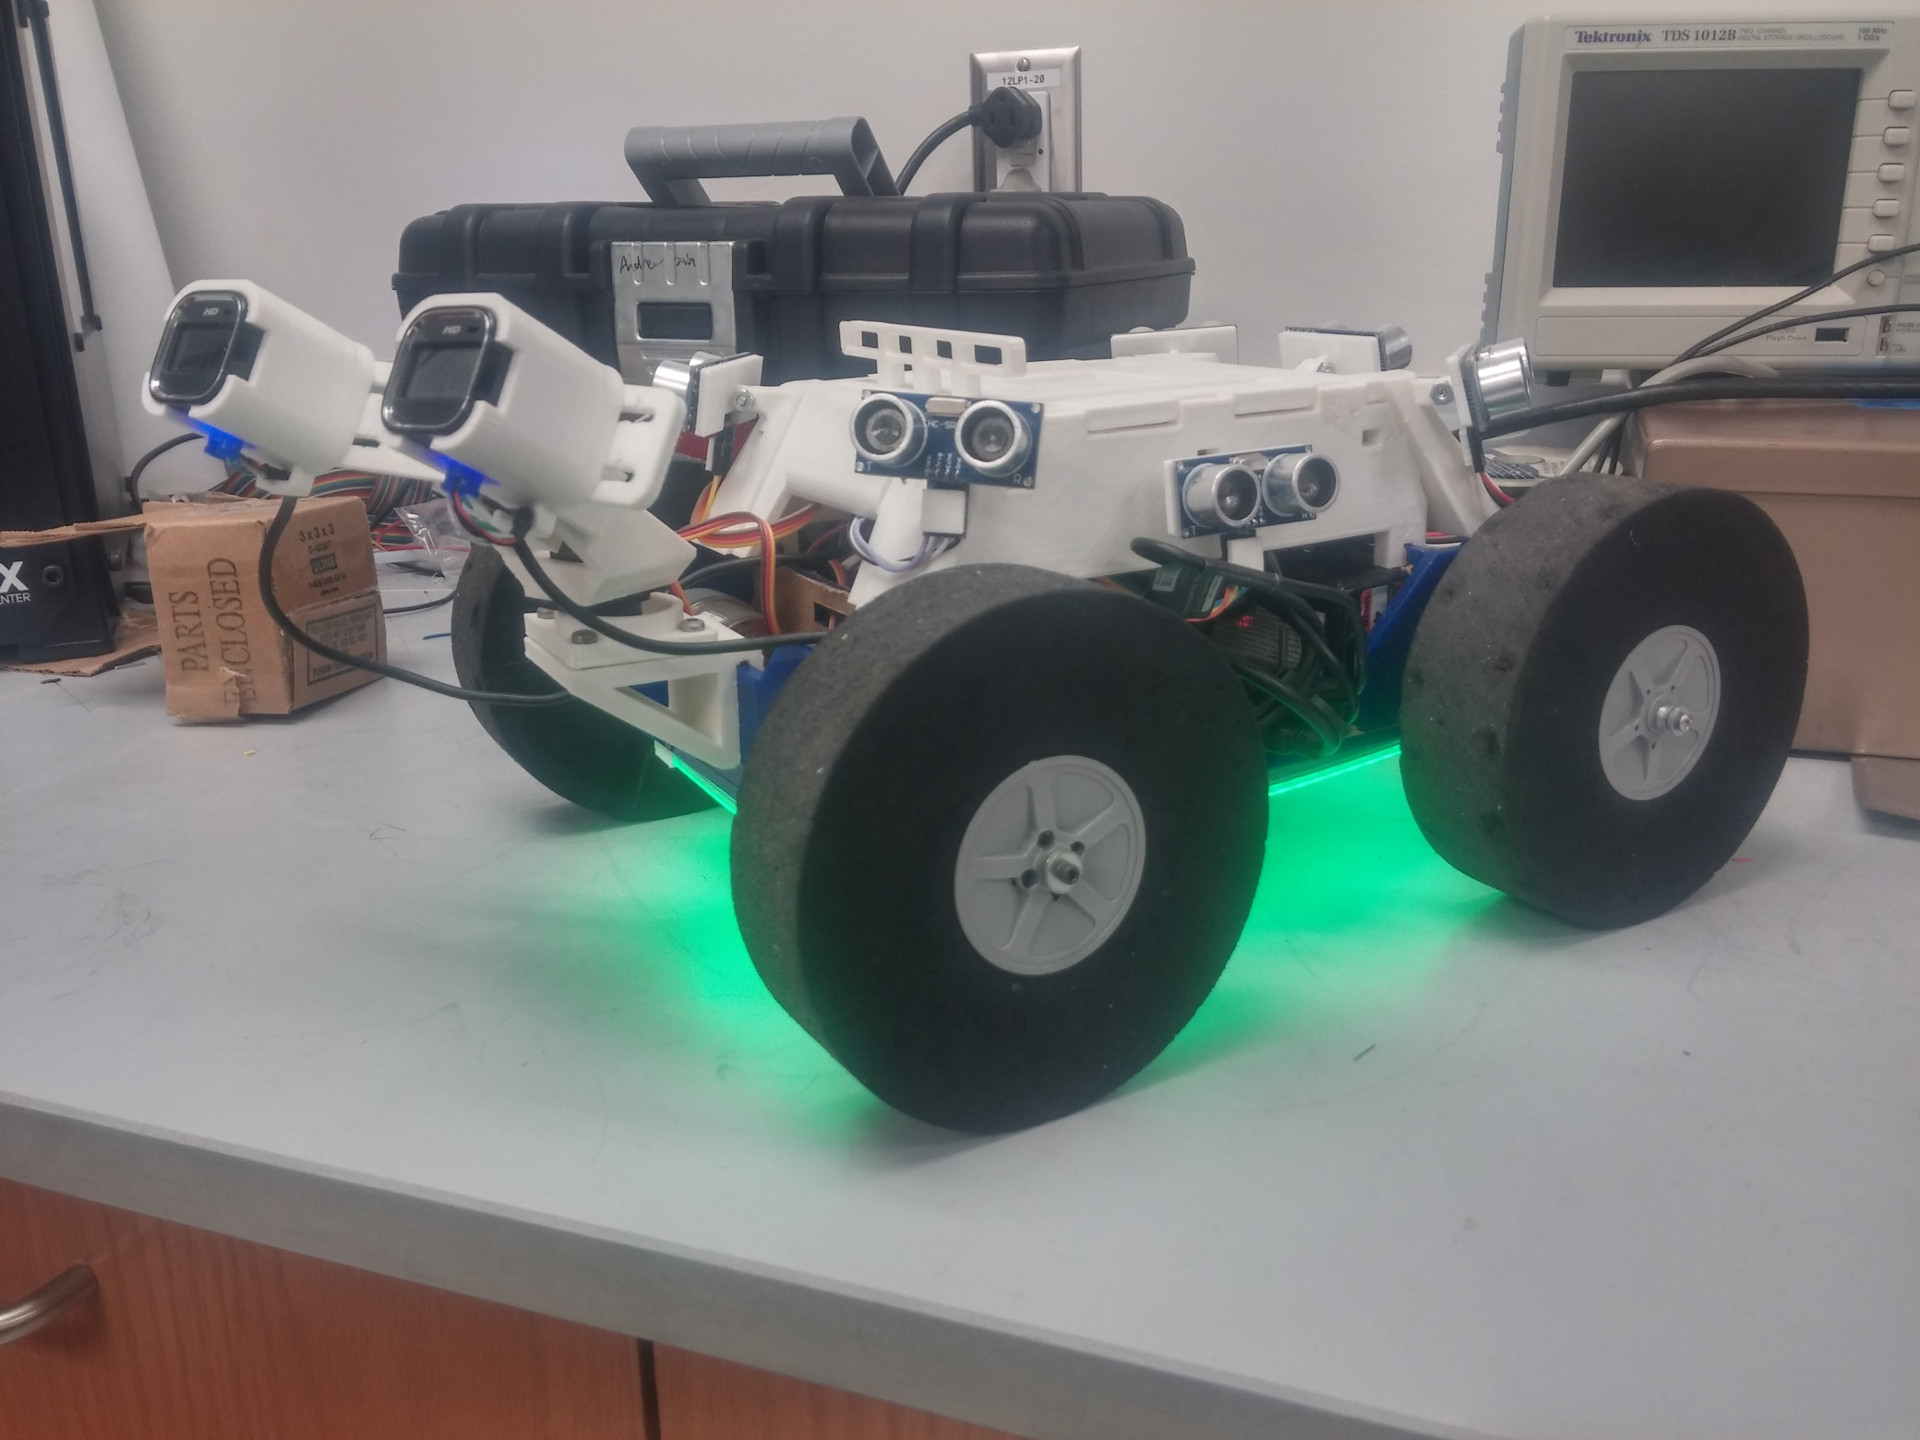 Side view of the rover, with the two front cameras tilted up, and LED strips on the bottom lit up green